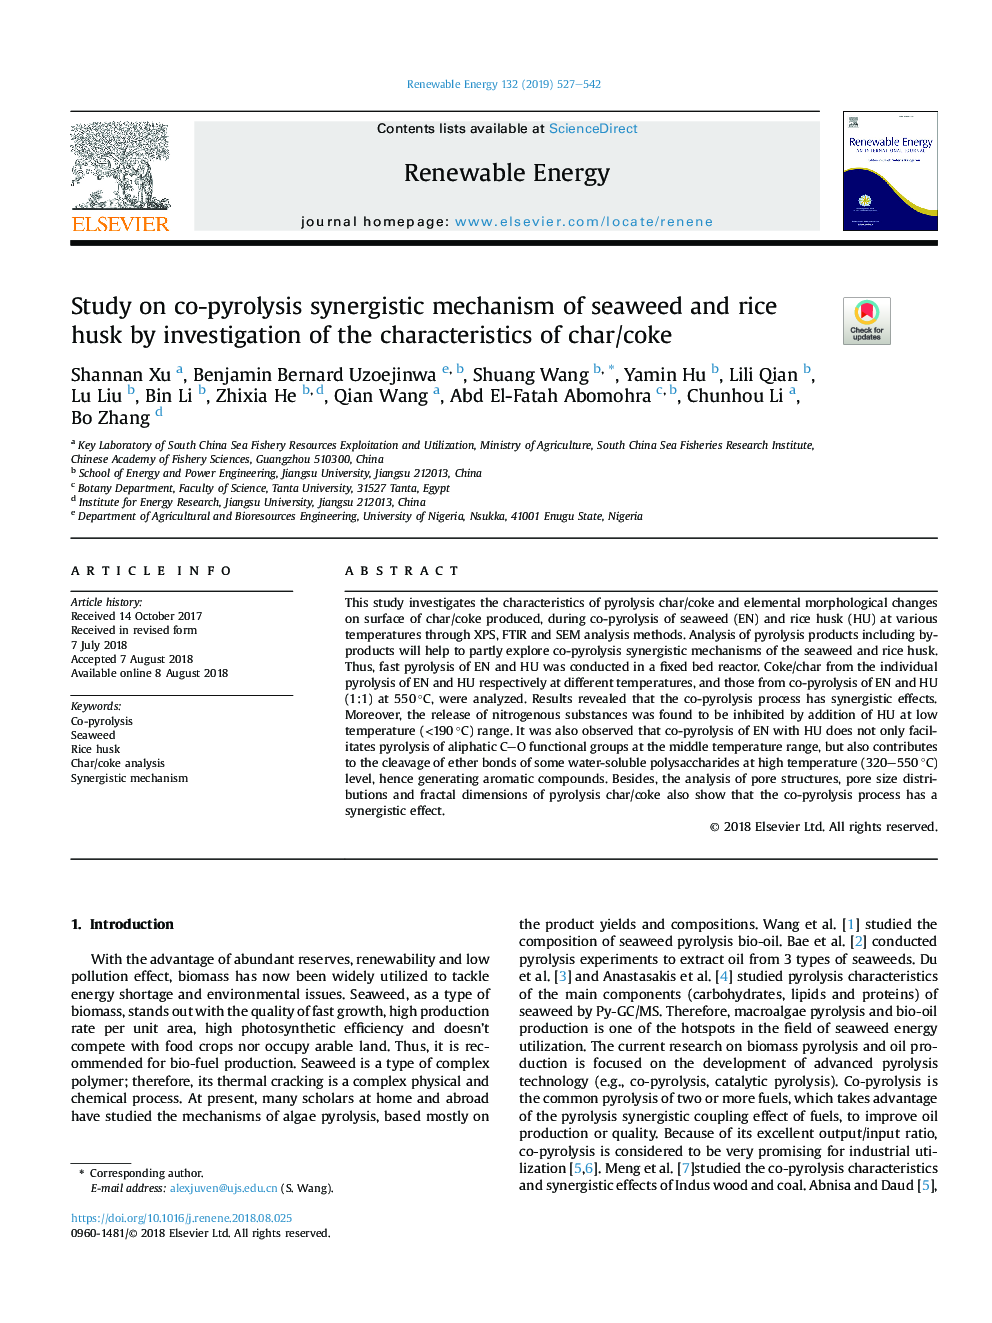 Study on co-pyrolysis synergistic mechanism of seaweed and rice husk by investigation of the characteristics of char/coke